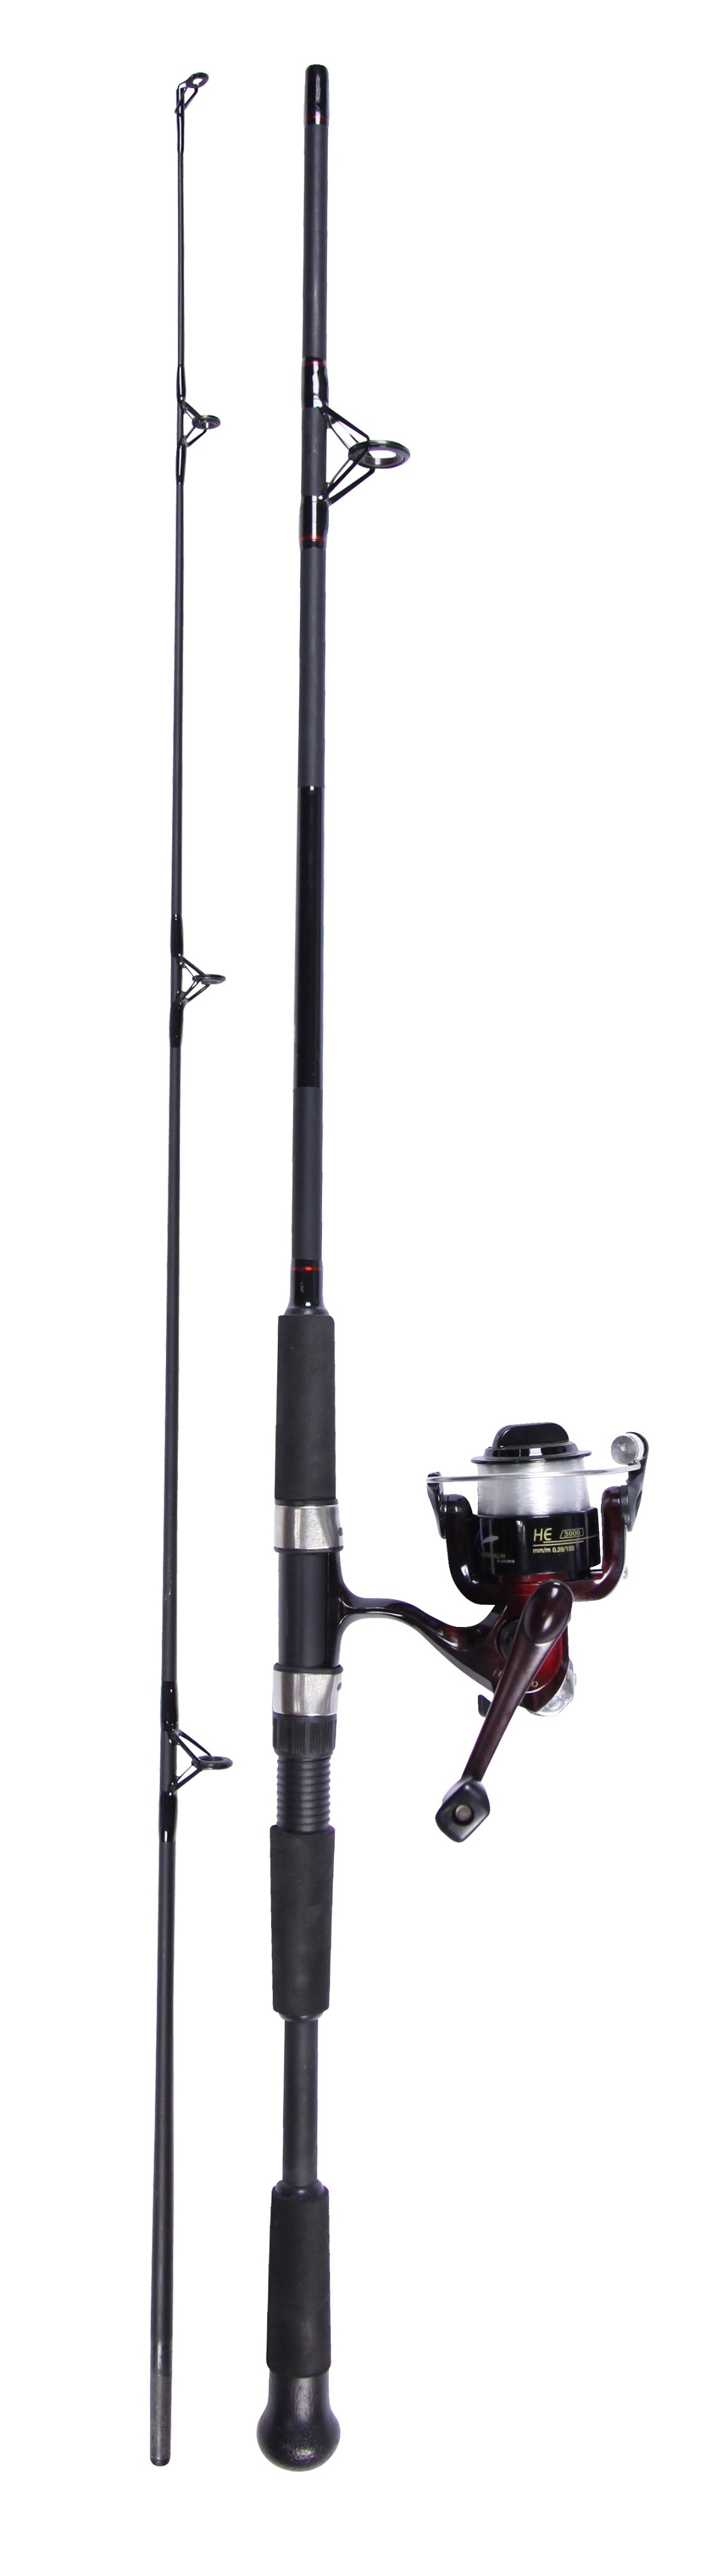 Adrenalin 6ft Rod and Reel Combo